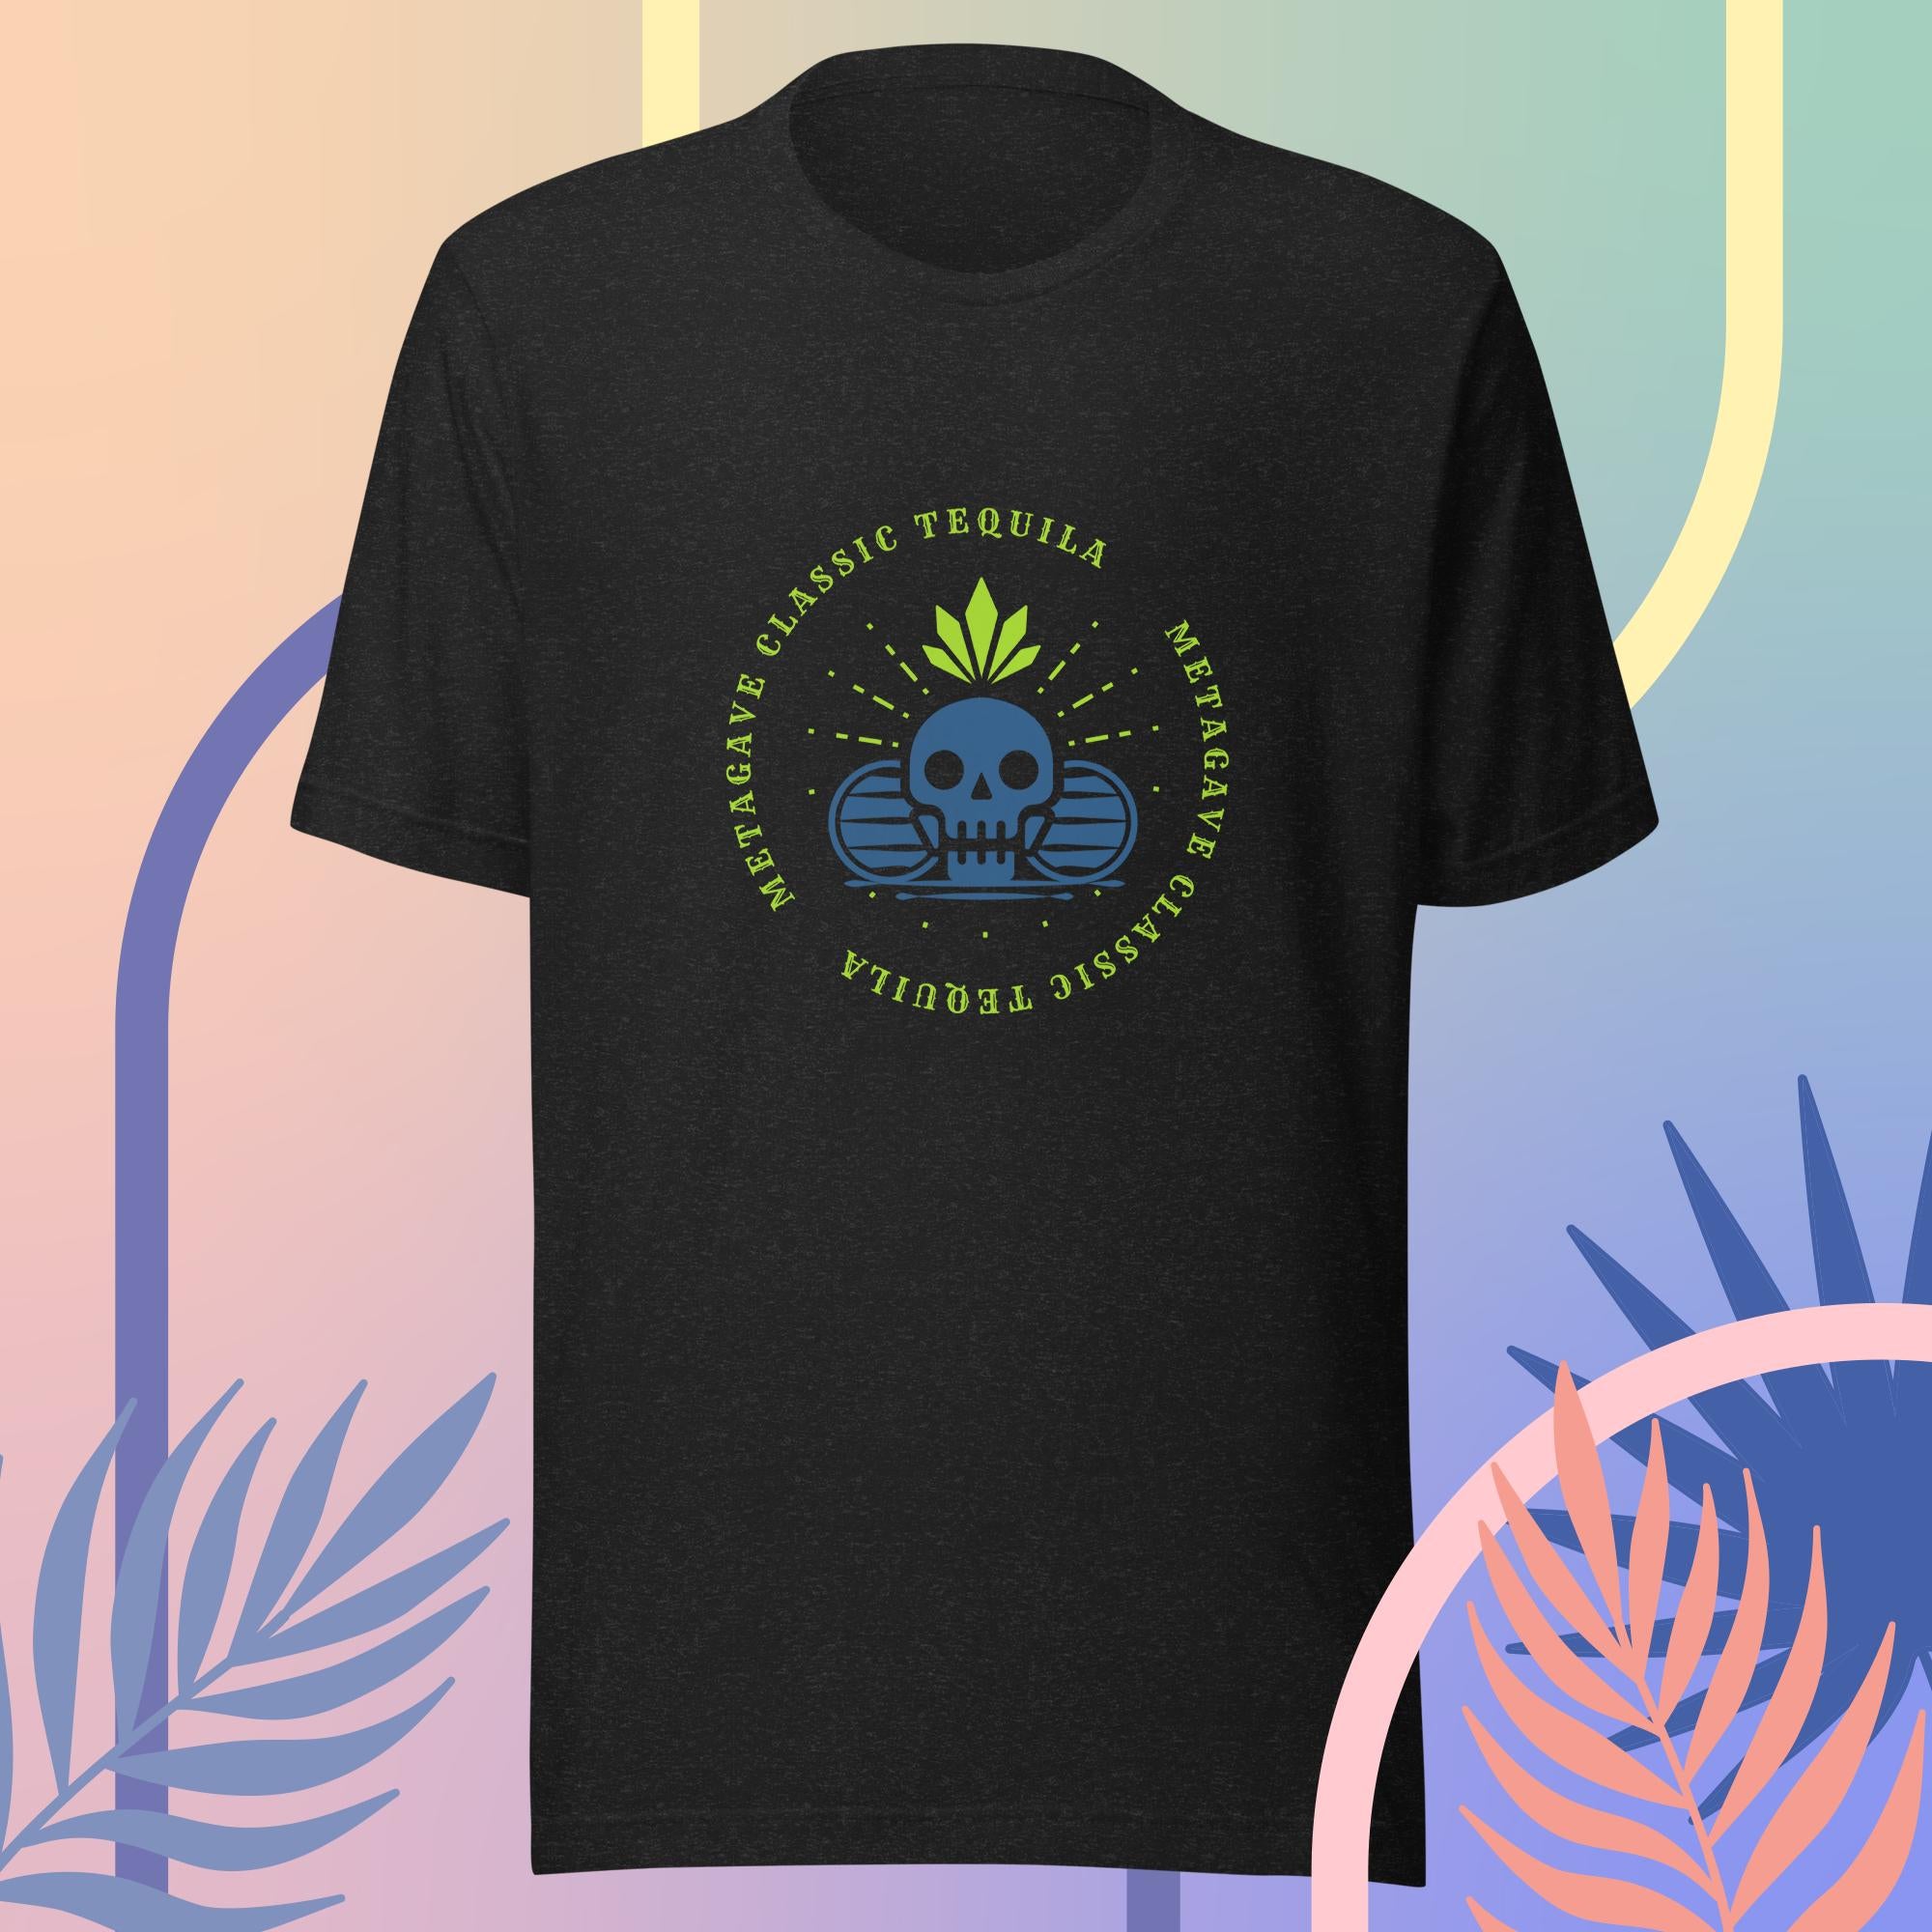 Men's Metagave Classic Tequila T-shirt